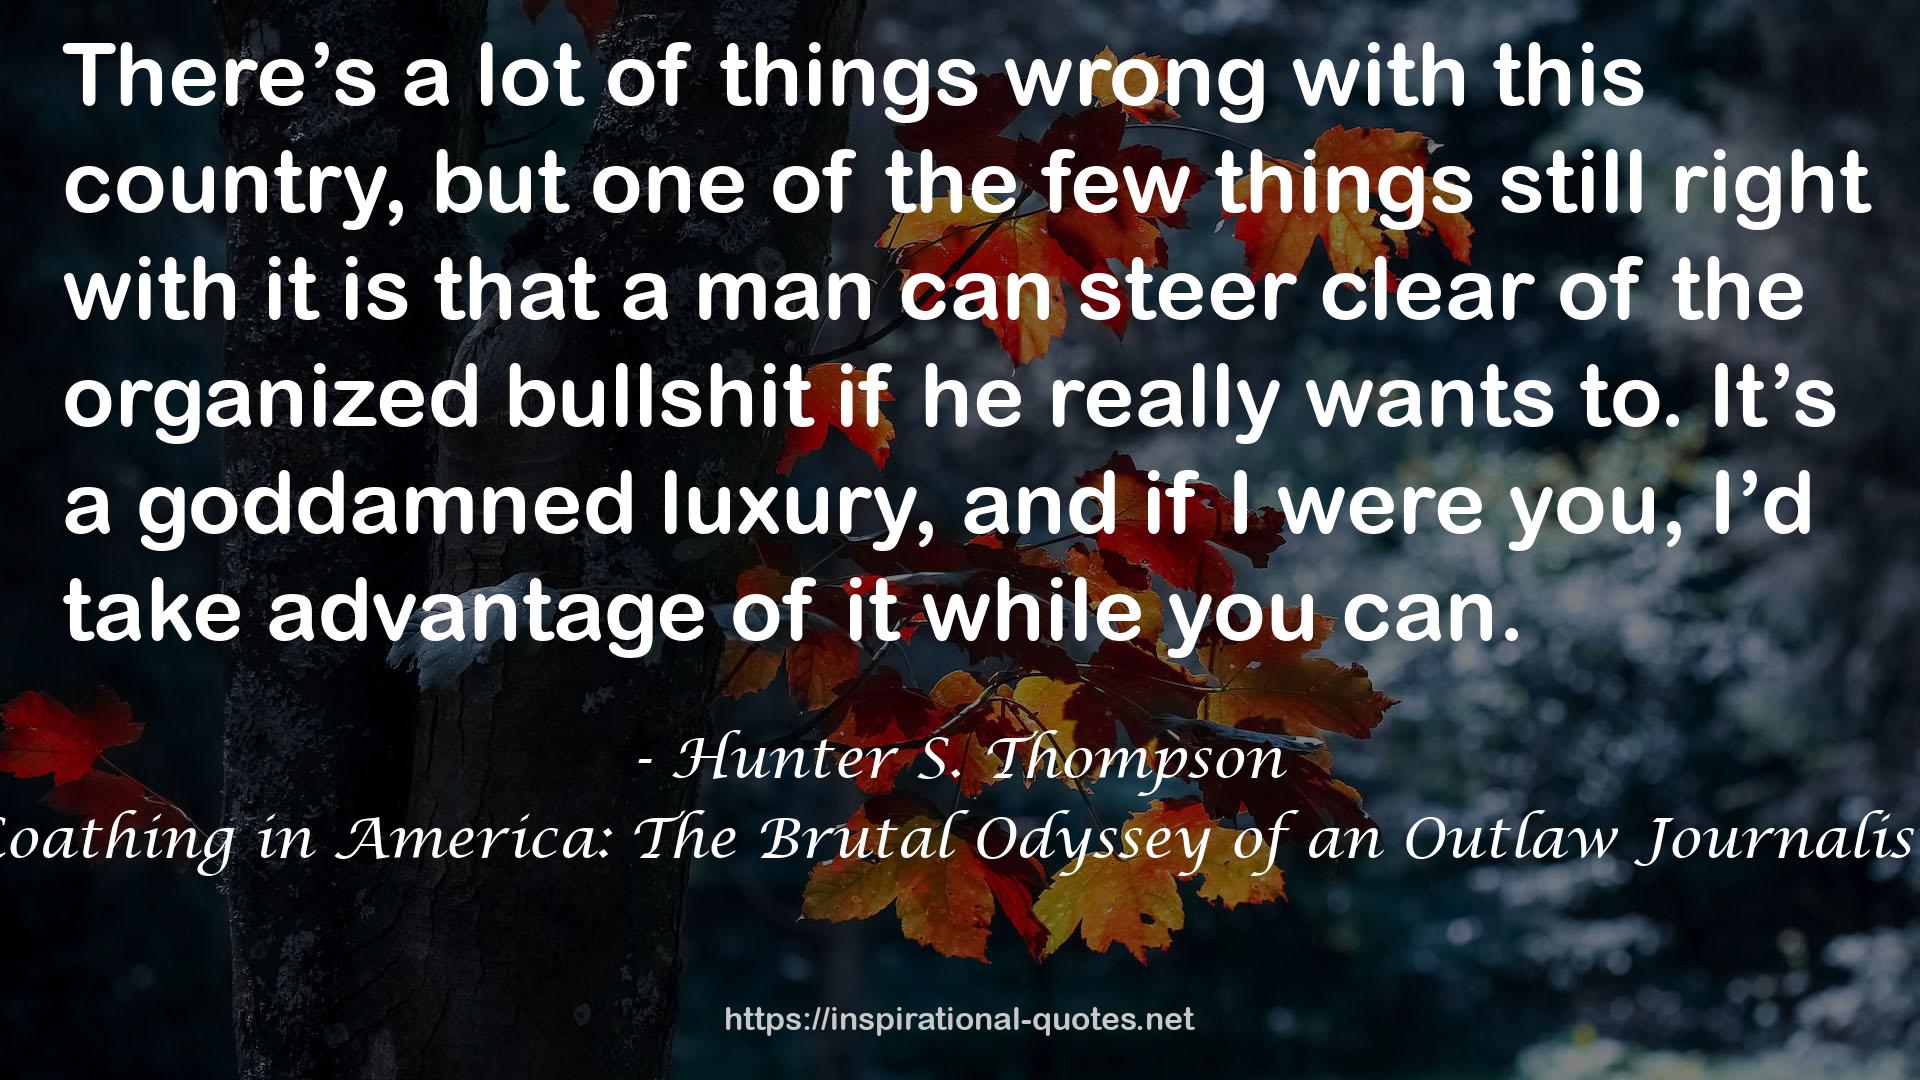 Fear and Loathing in America: The Brutal Odyssey of an Outlaw Journalist, 1968-1976 QUOTES